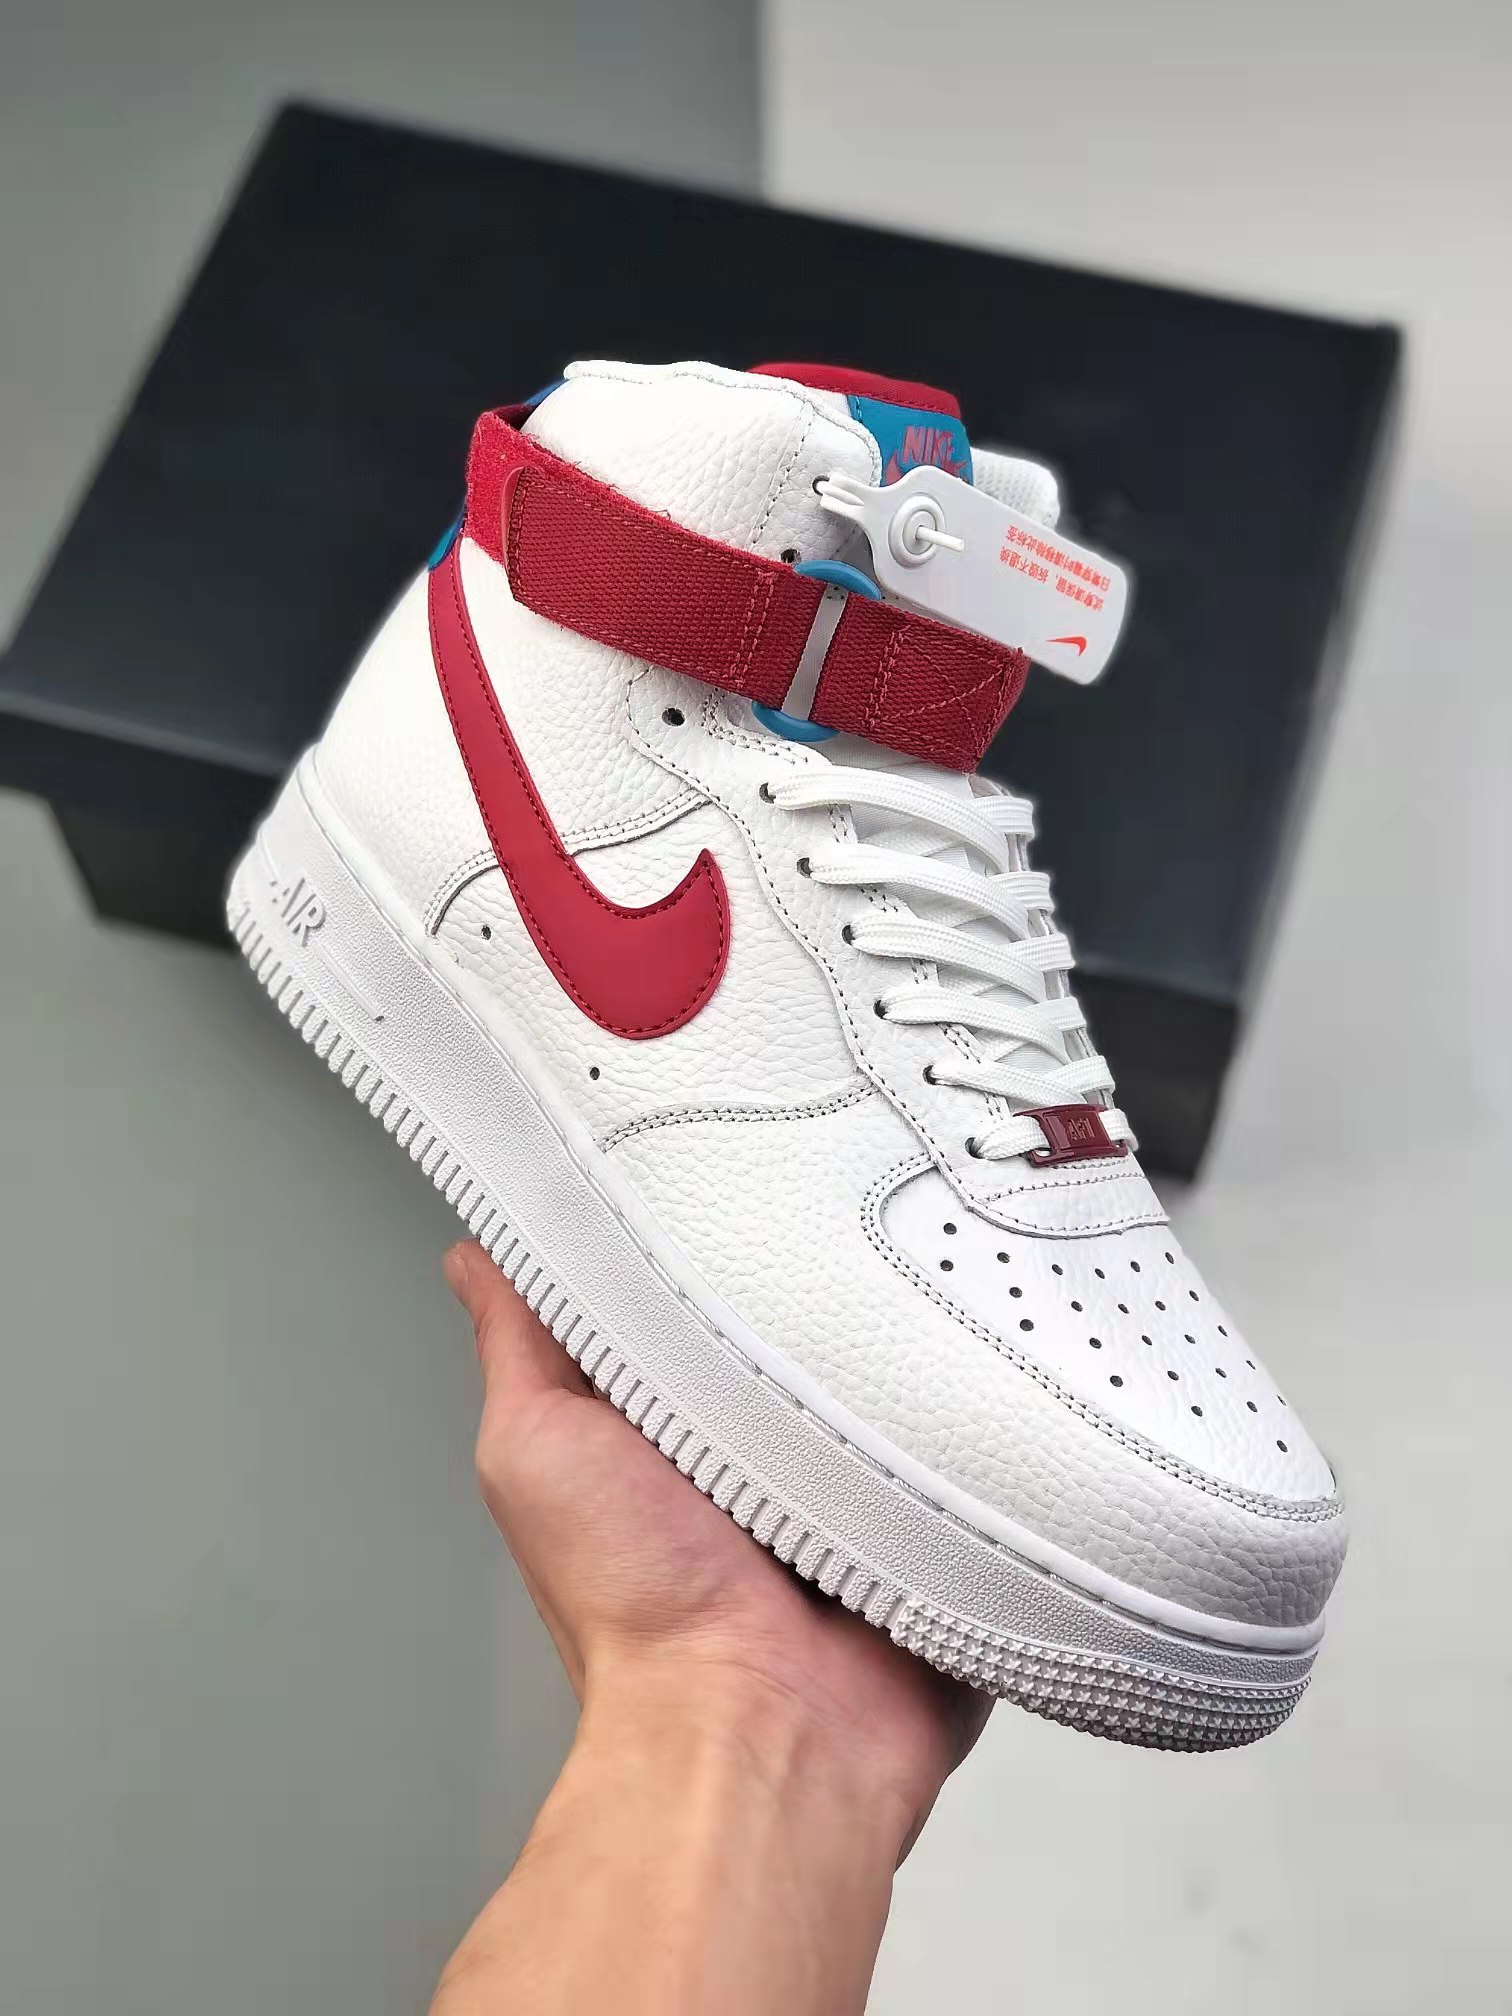 Nike Air Force 1 High 'White Team Red' 334031-119 - Classic Design with Premium Style